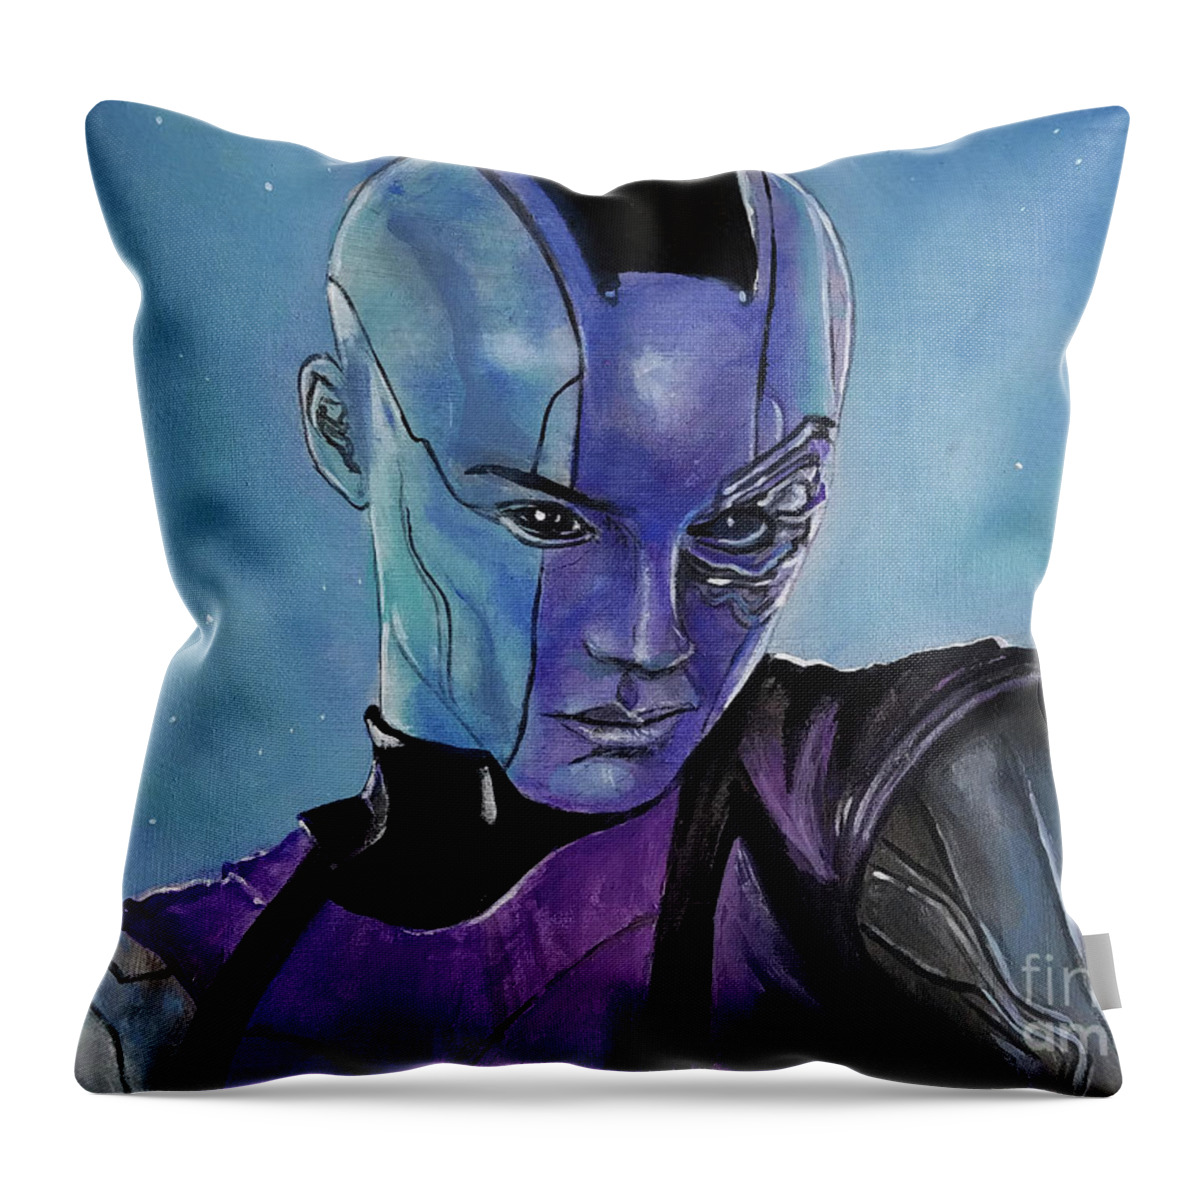 Guardians Of The Galaxy Throw Pillow featuring the painting Nebula by Tom Carlton